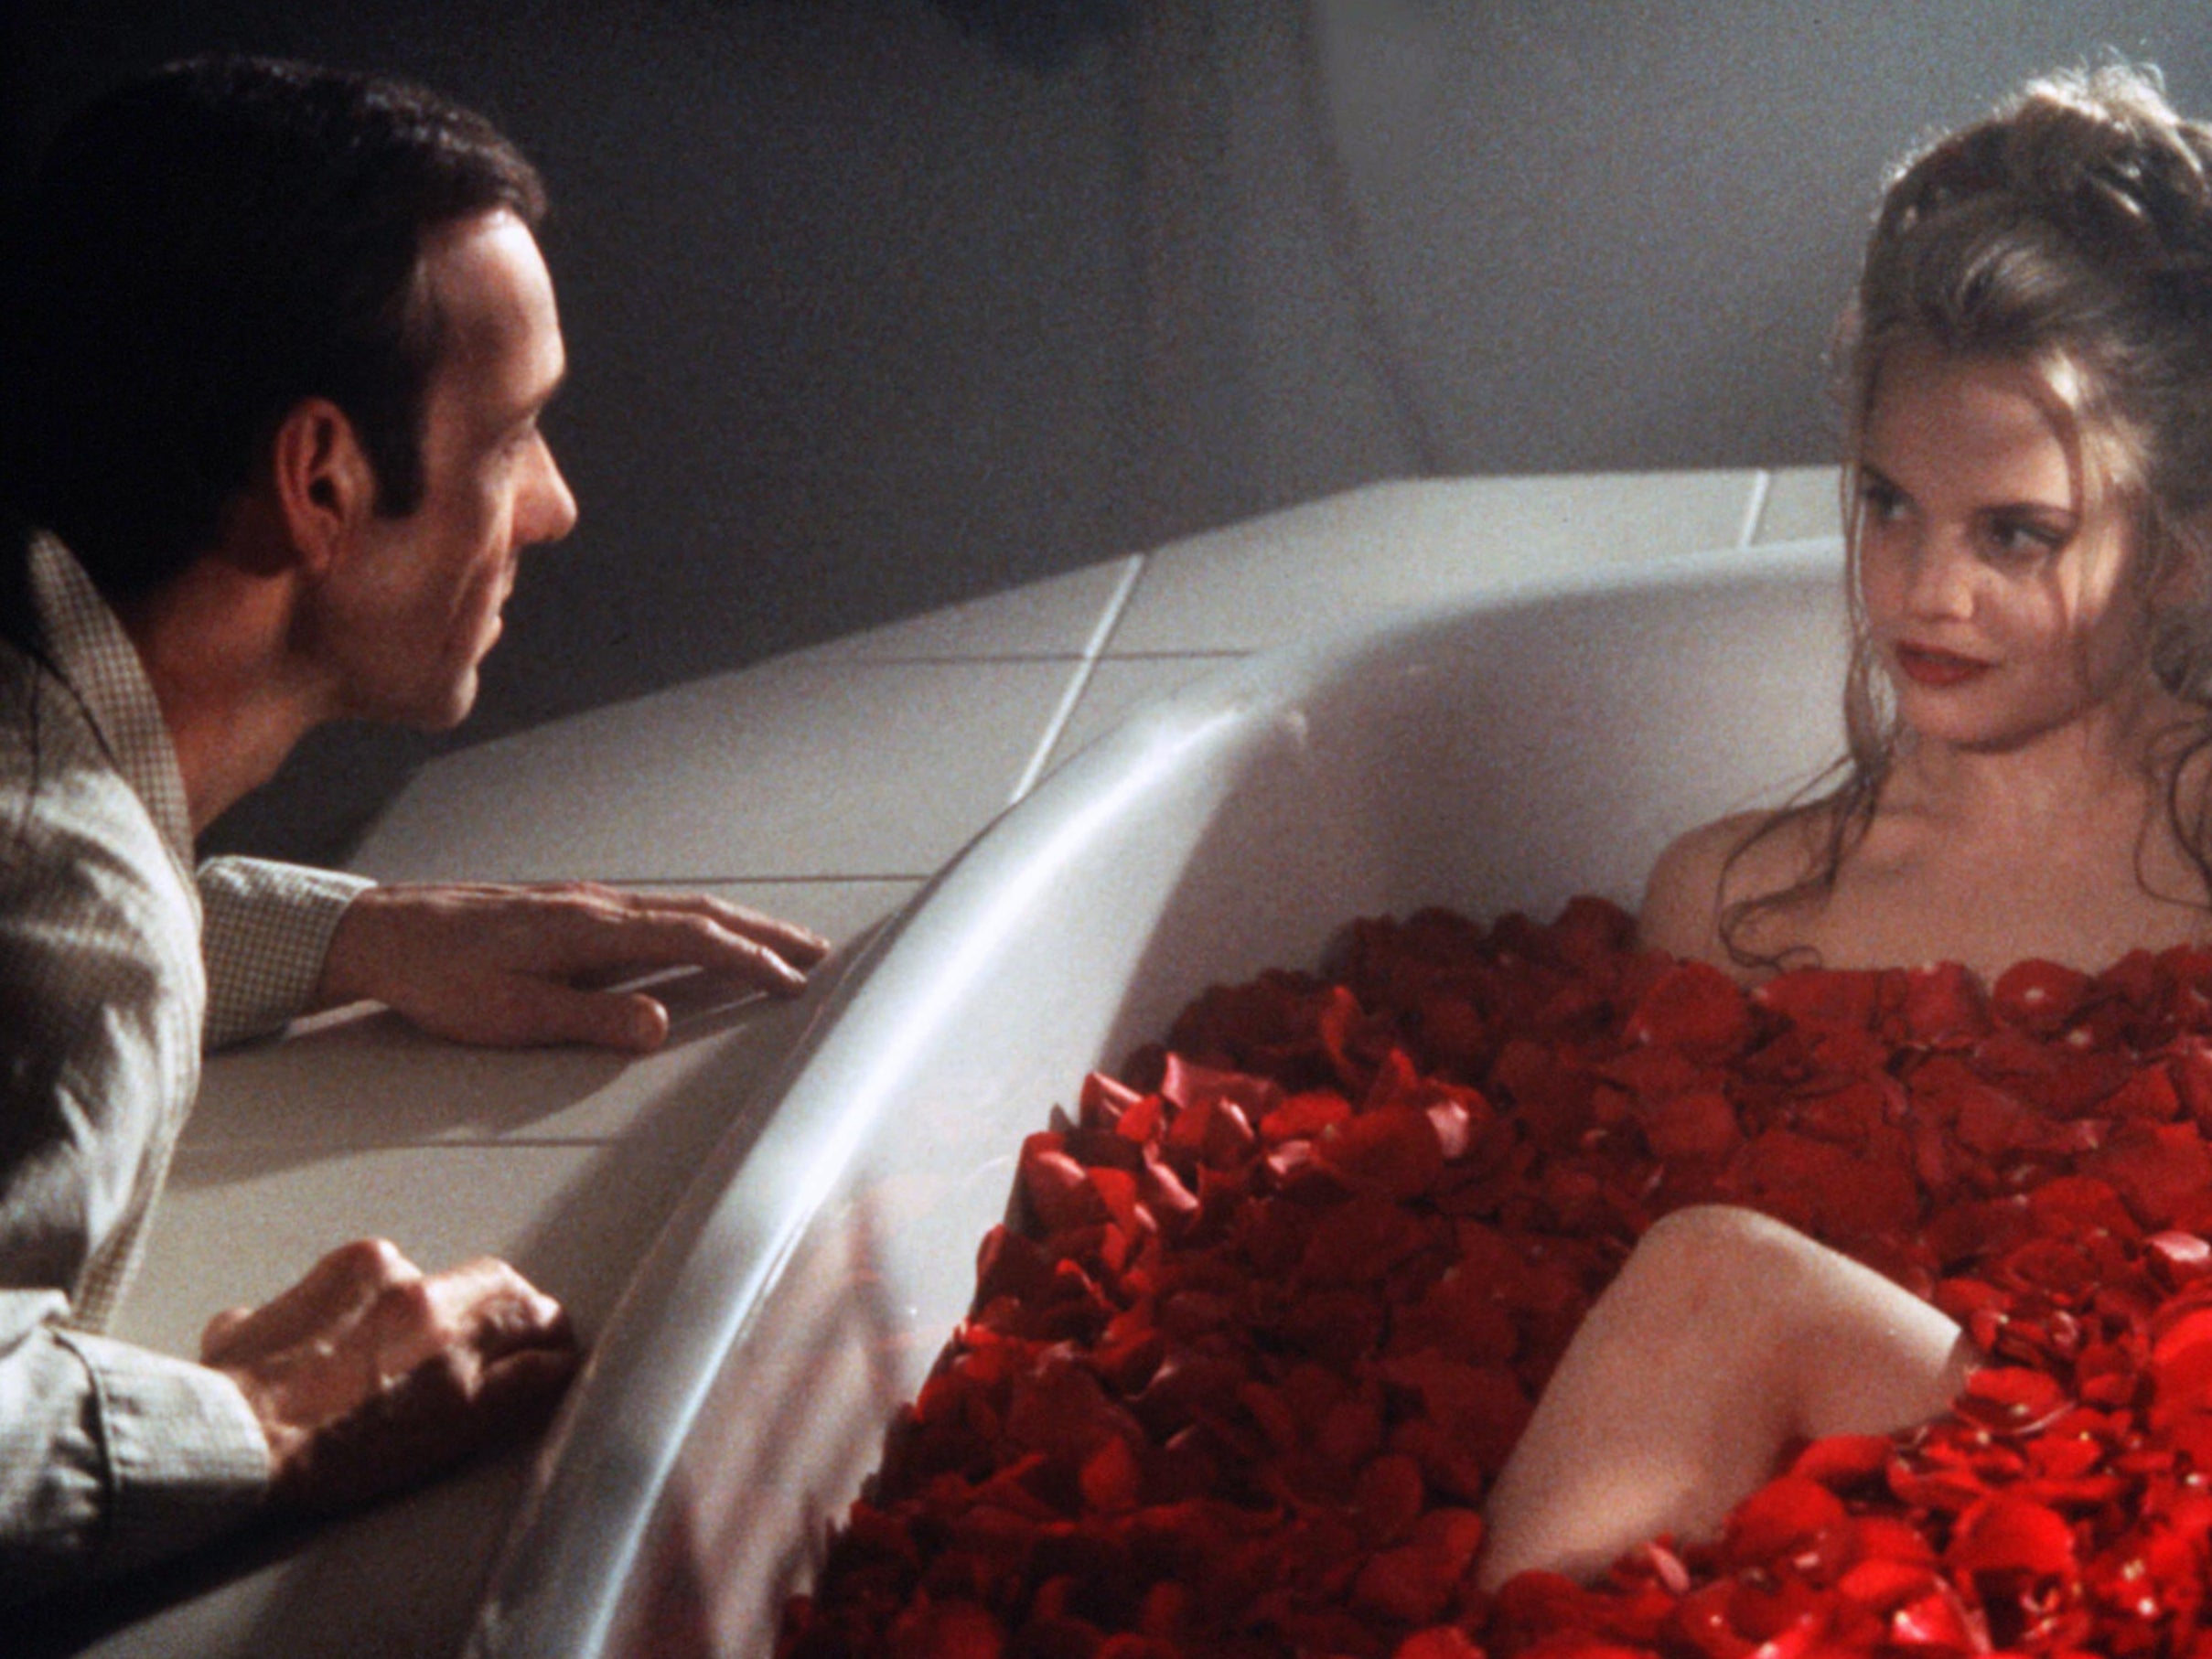 Kevin Spacey and Mena Suvari in ‘American Beauty’